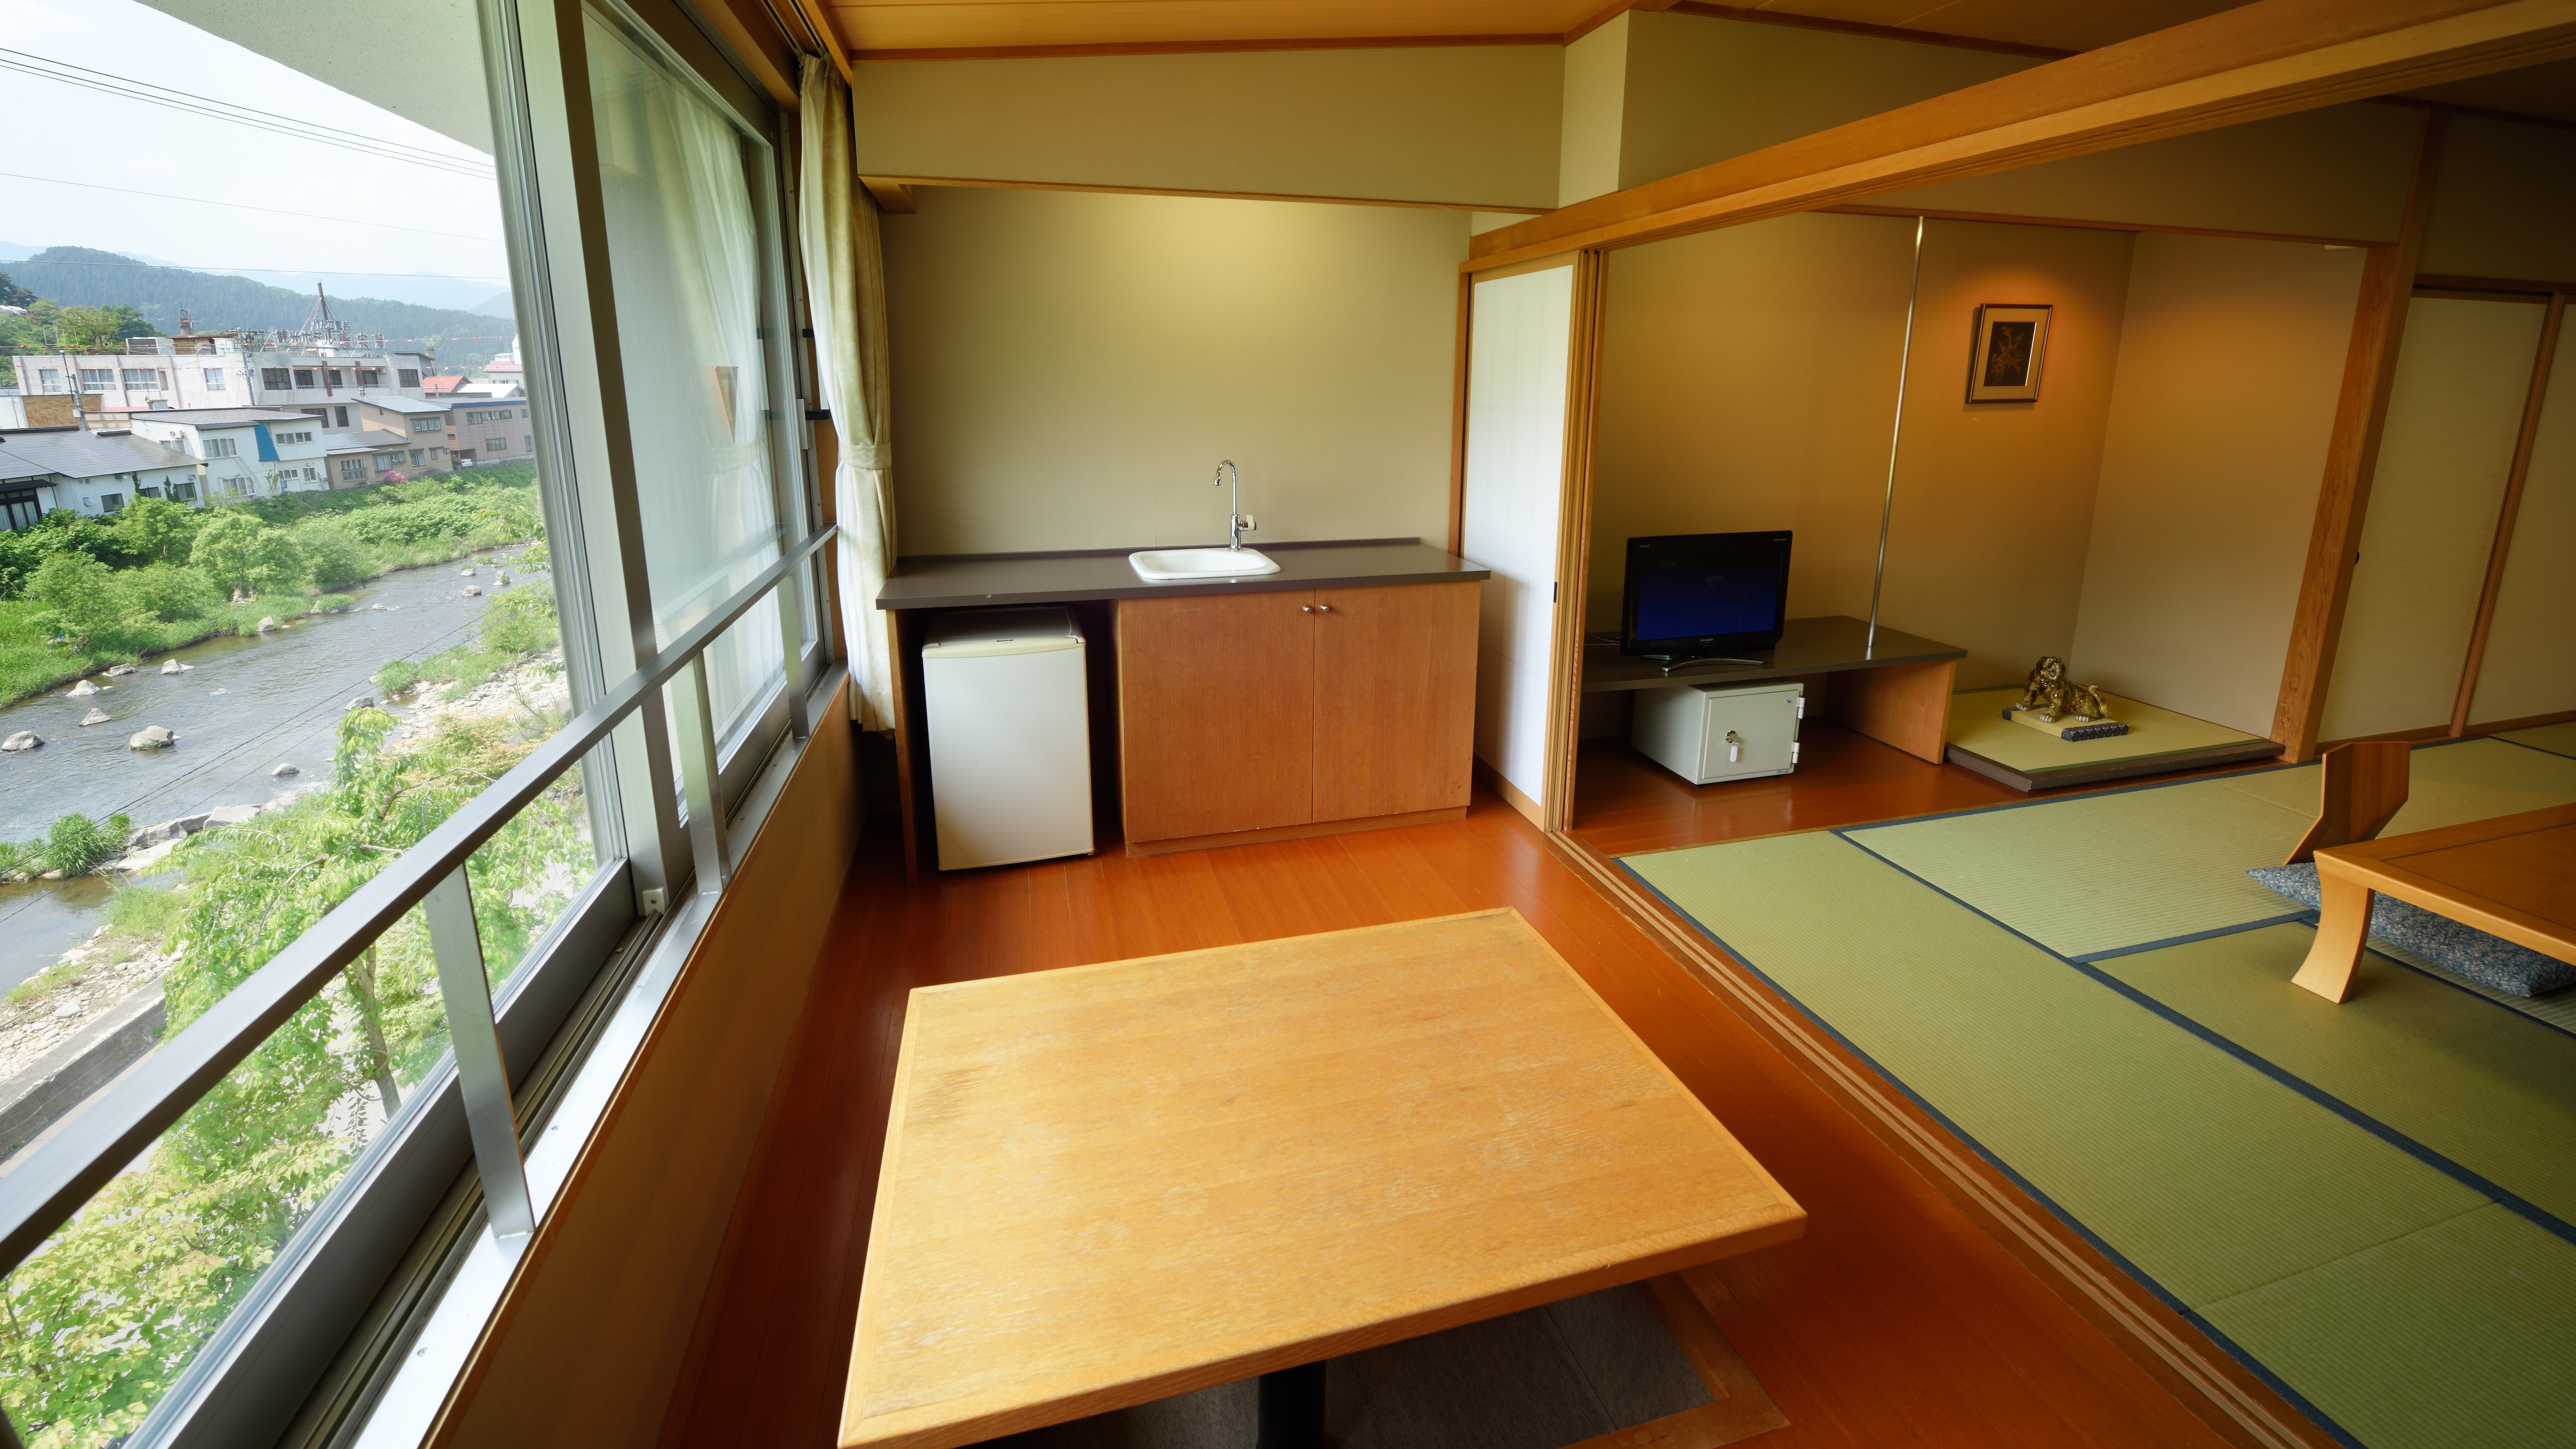 Main building) Japanese-style room with 12 tatami mats